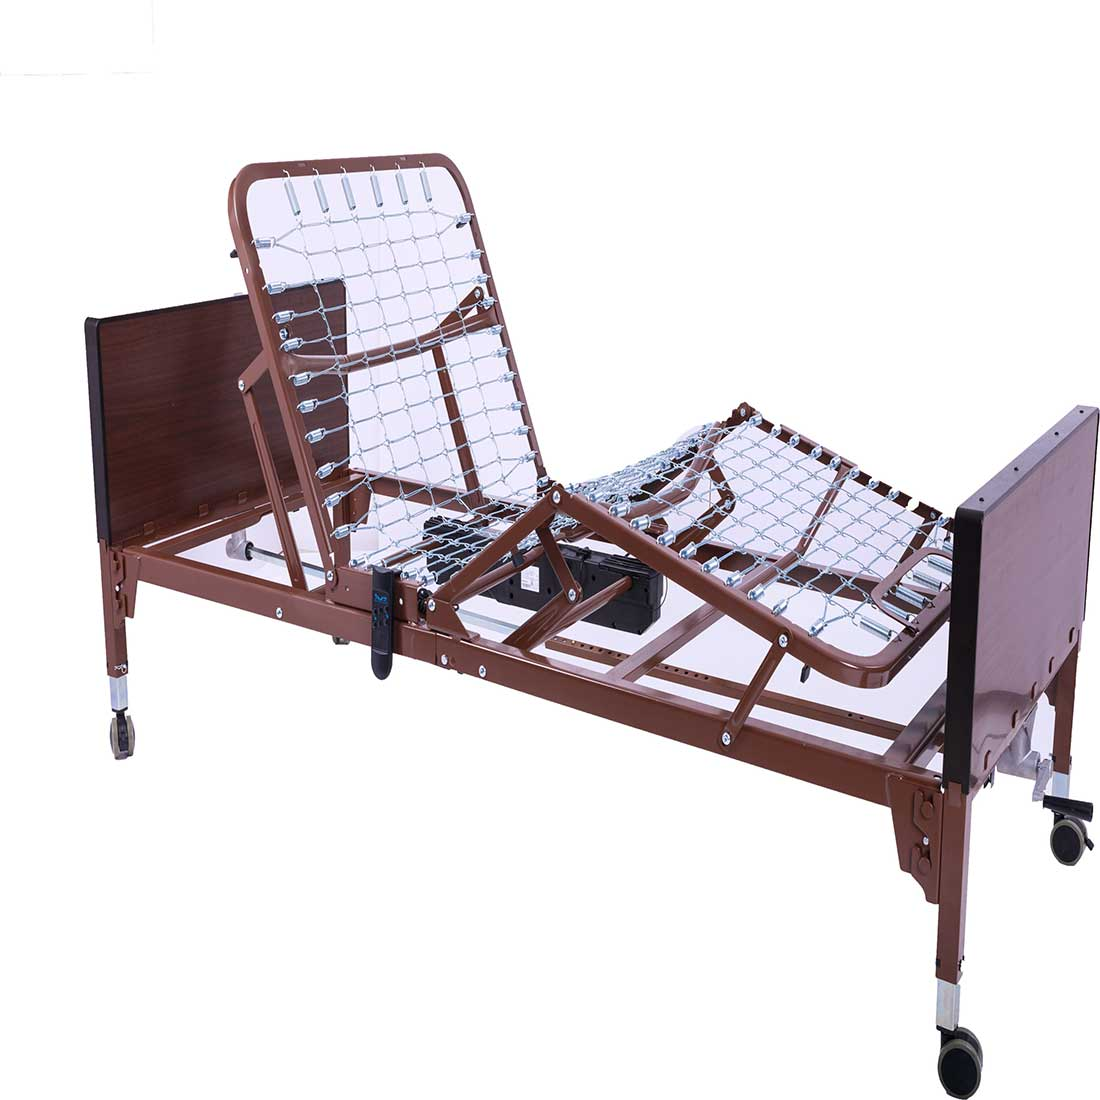 Full electric adjustable bed